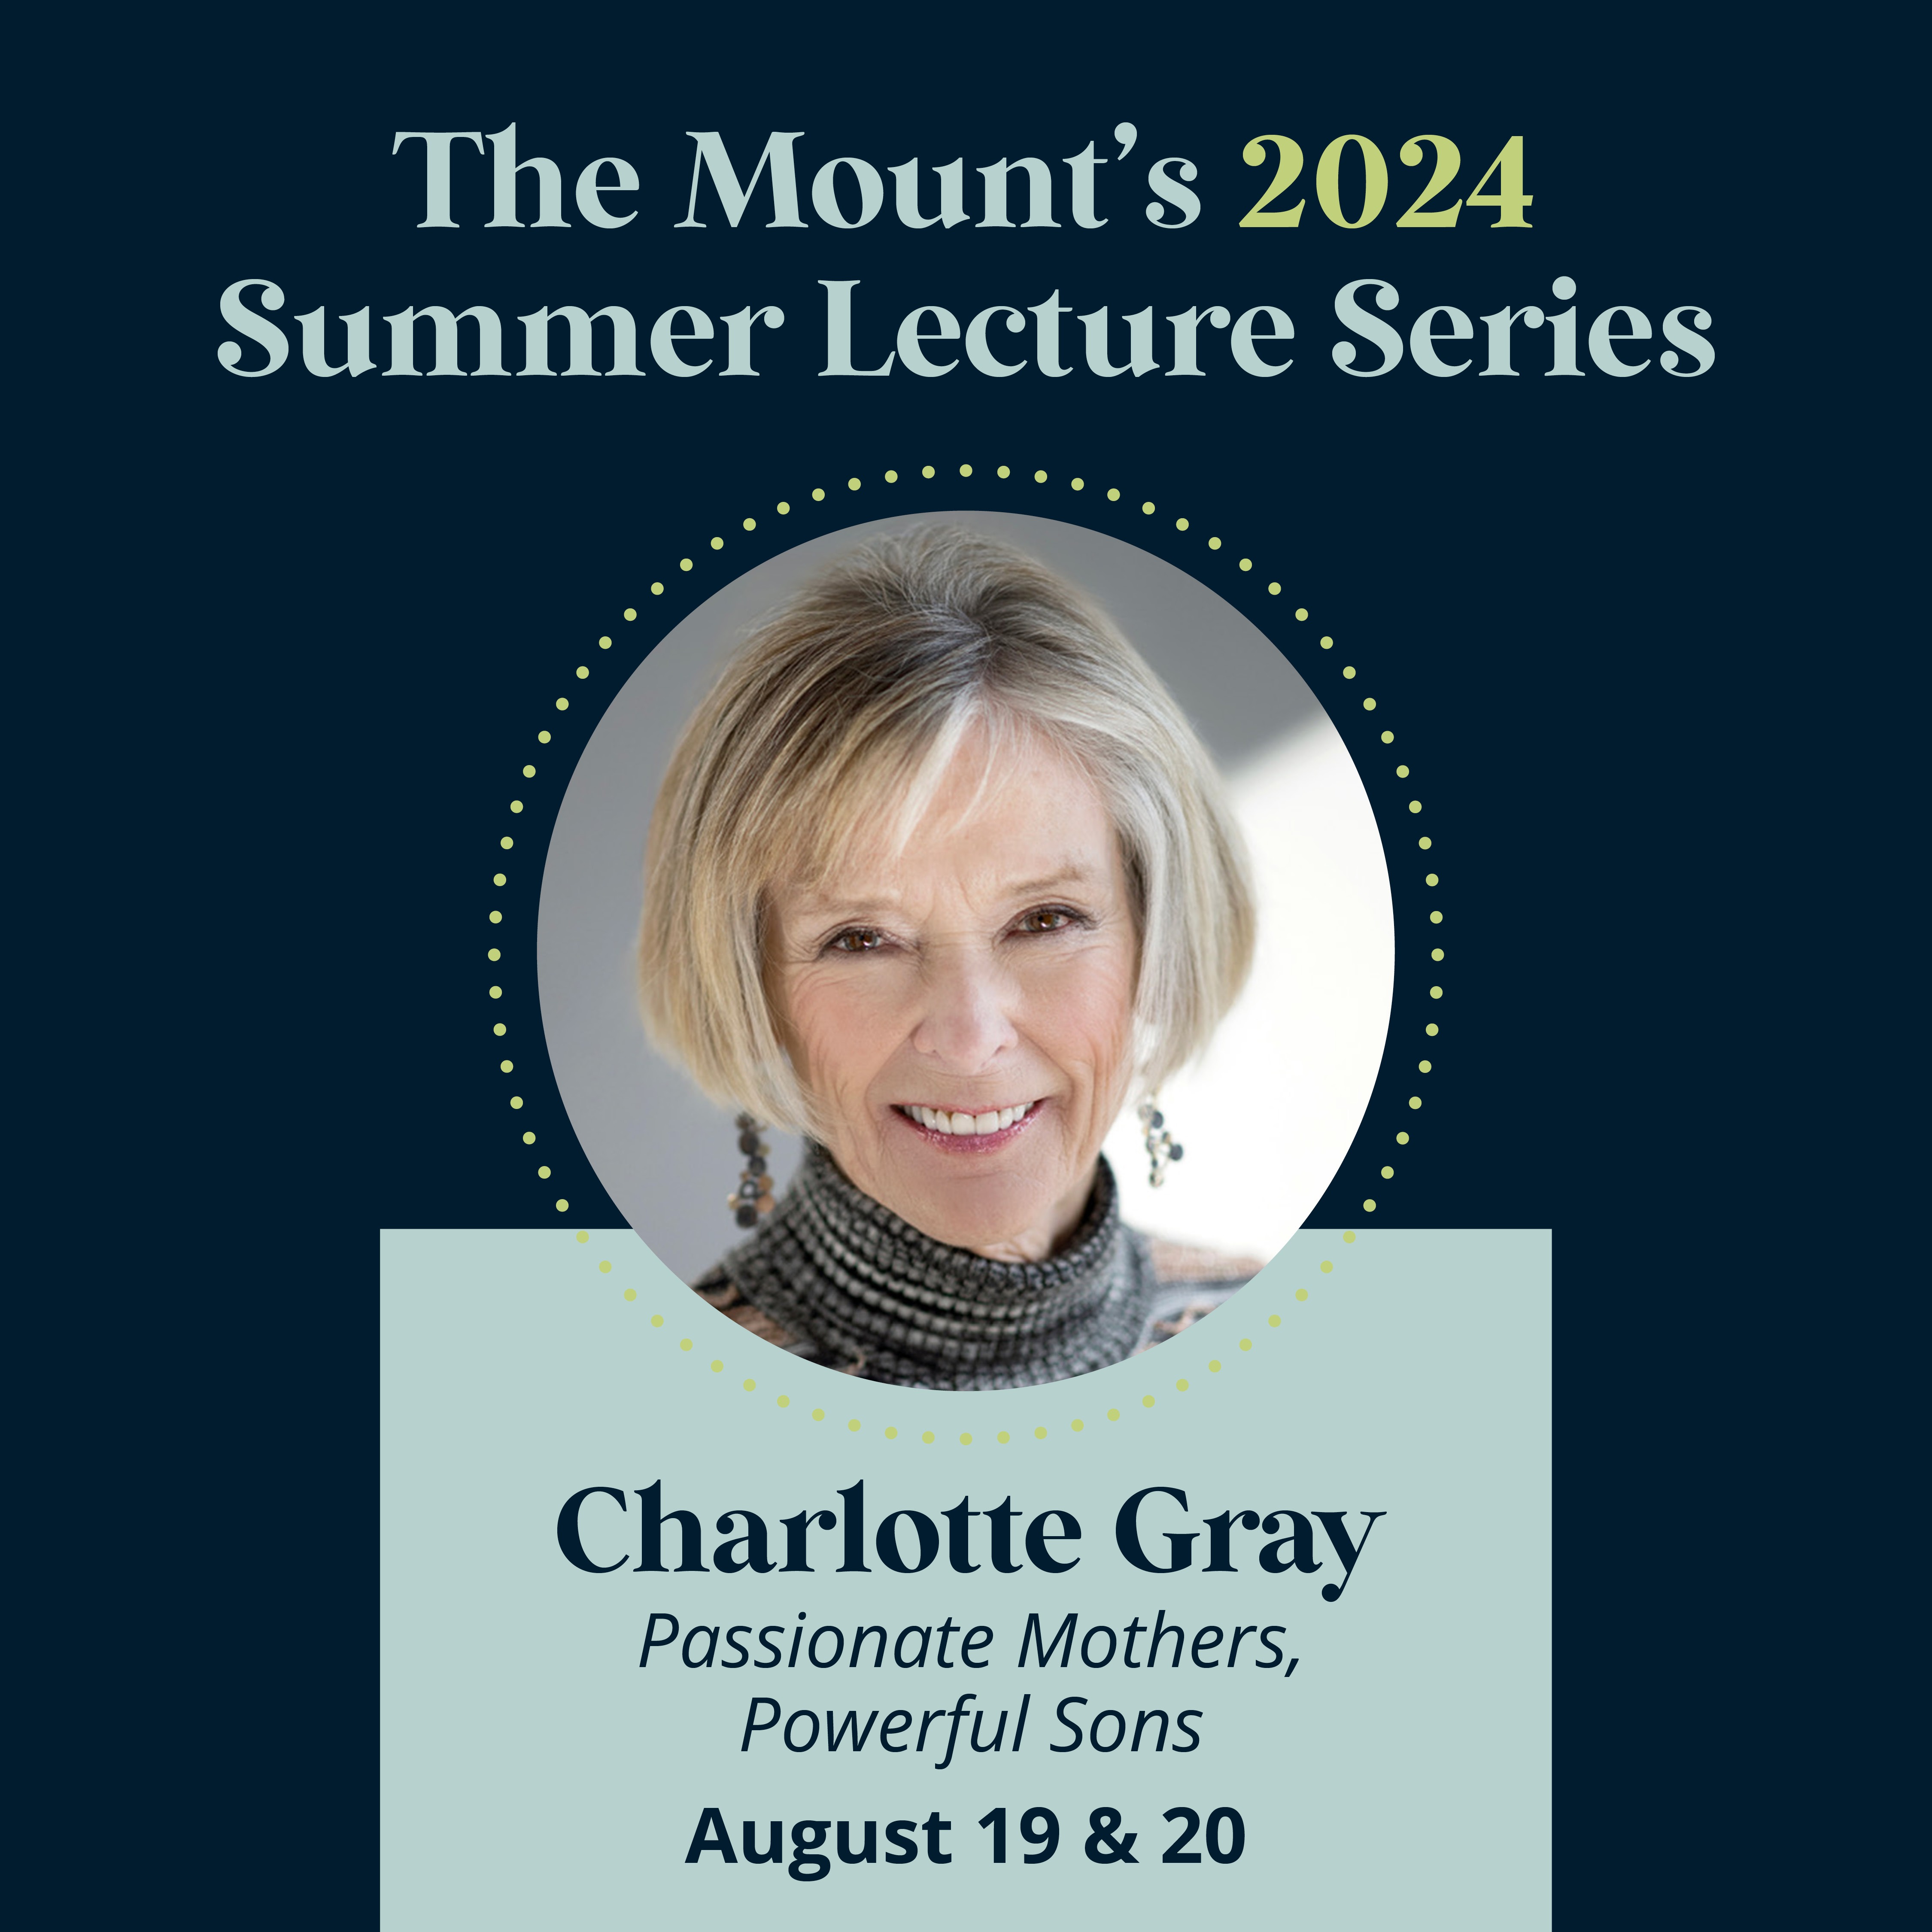 Monday lecture with Charlotte Gray